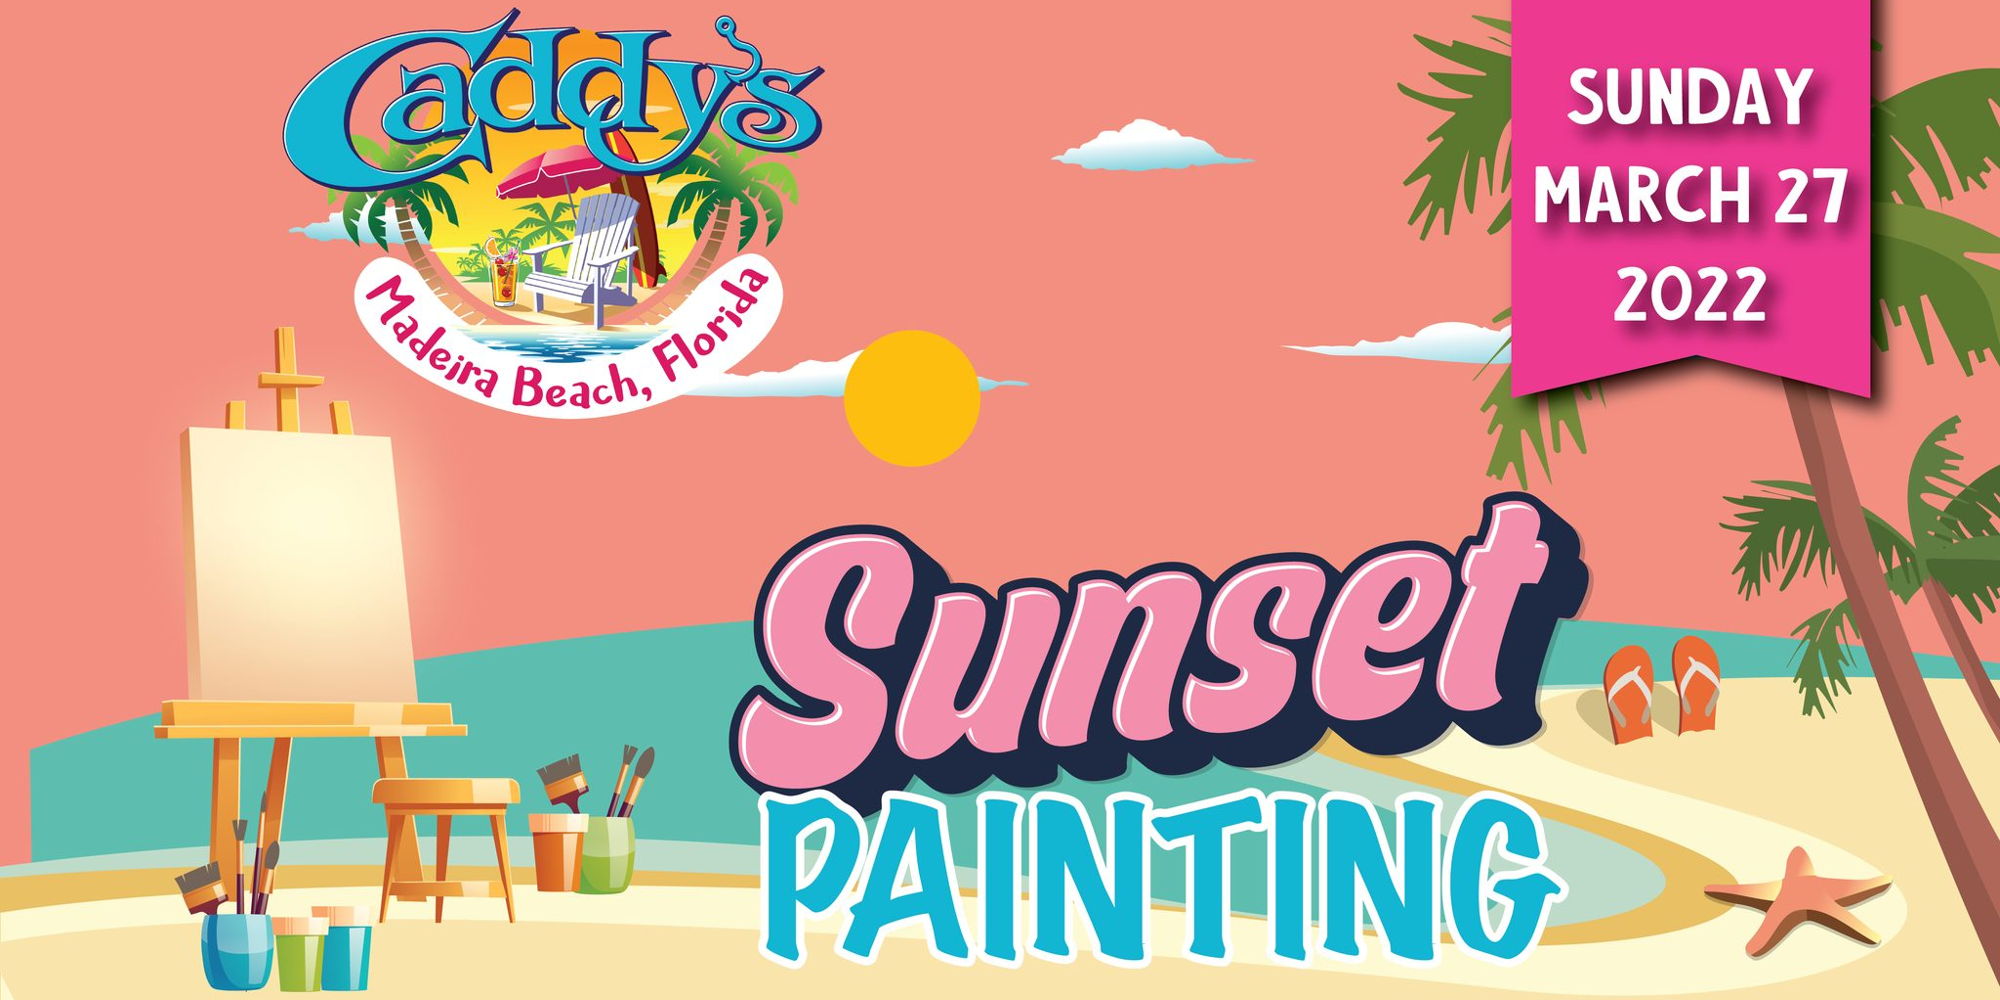 Sunset Painting at Caddy’s Mad Beach! promotional image